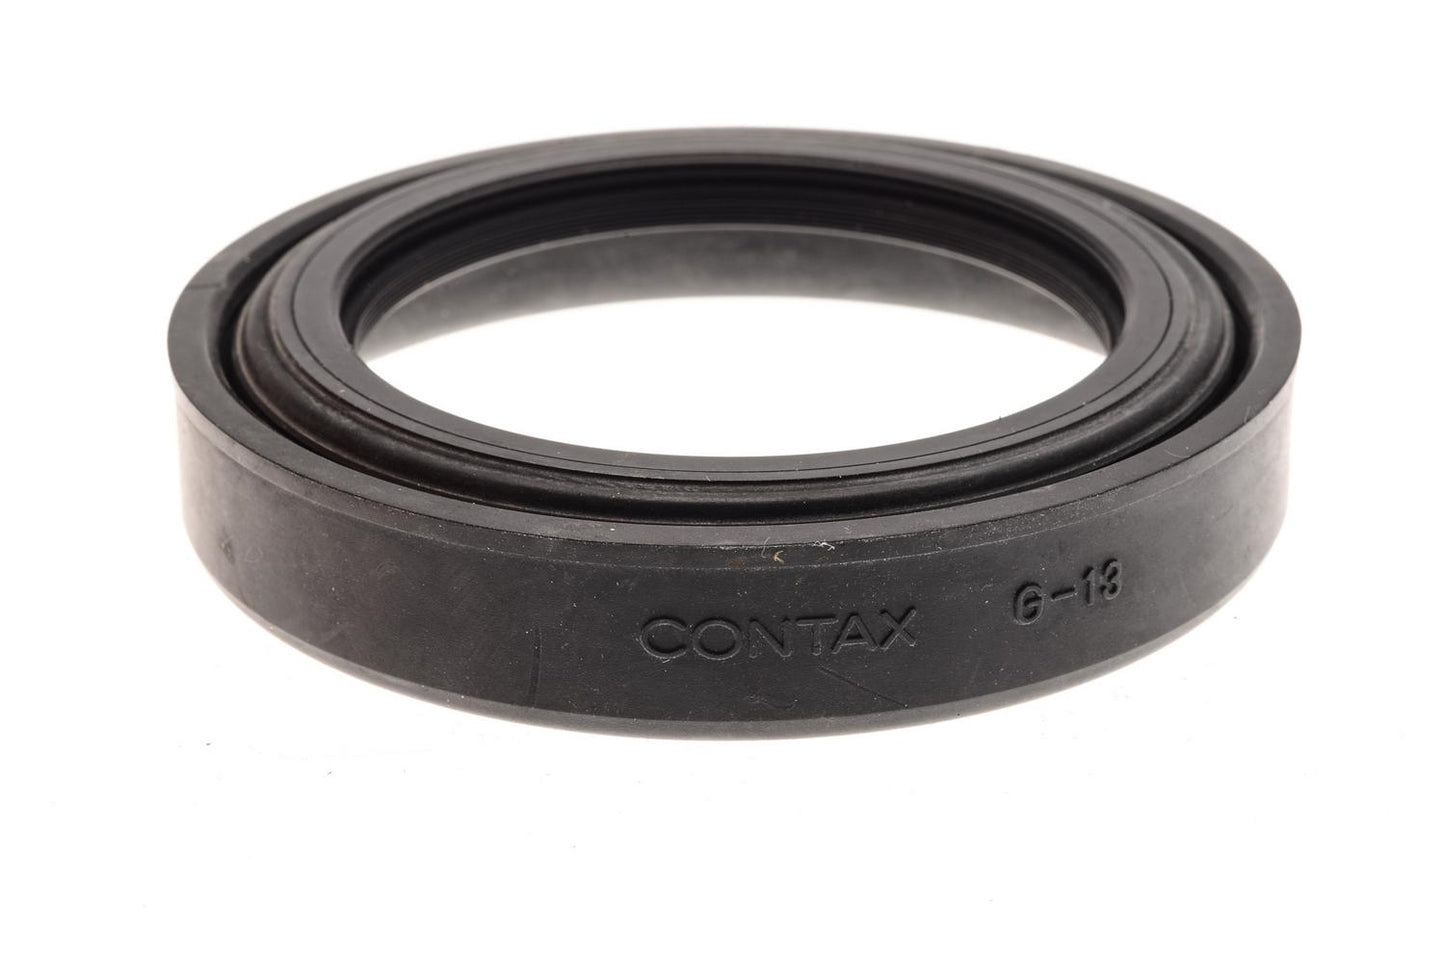 Contax 67mm Rubber Lens Hood G-13 - Accessory